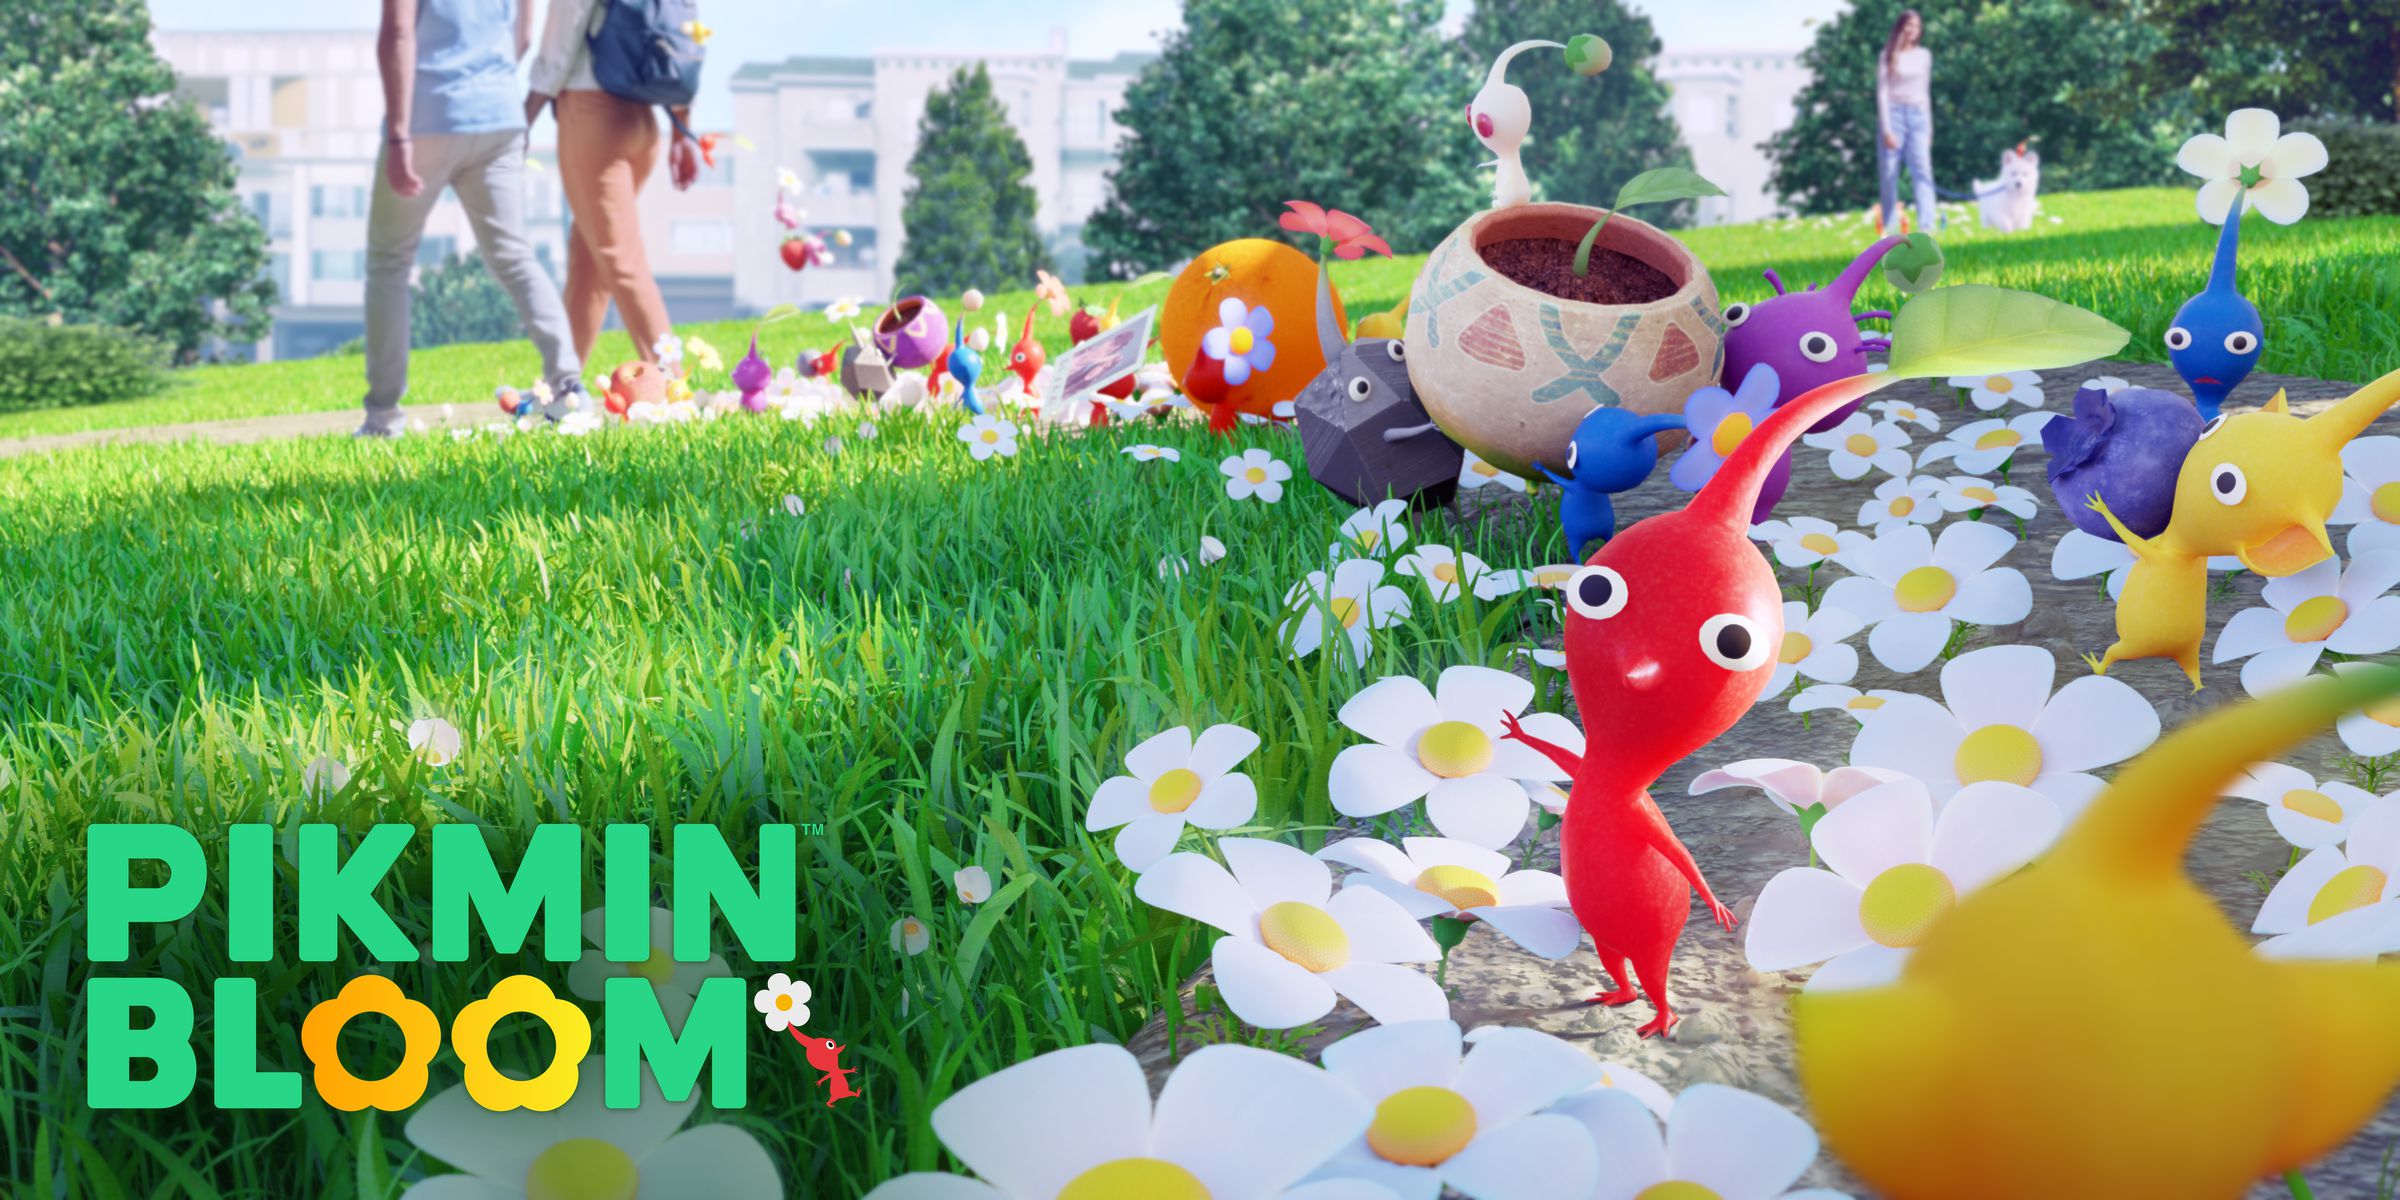 Screenshot of Pikmin Bloom: Colorful little creatures with big heads in the middle of a lawn full of daisies.